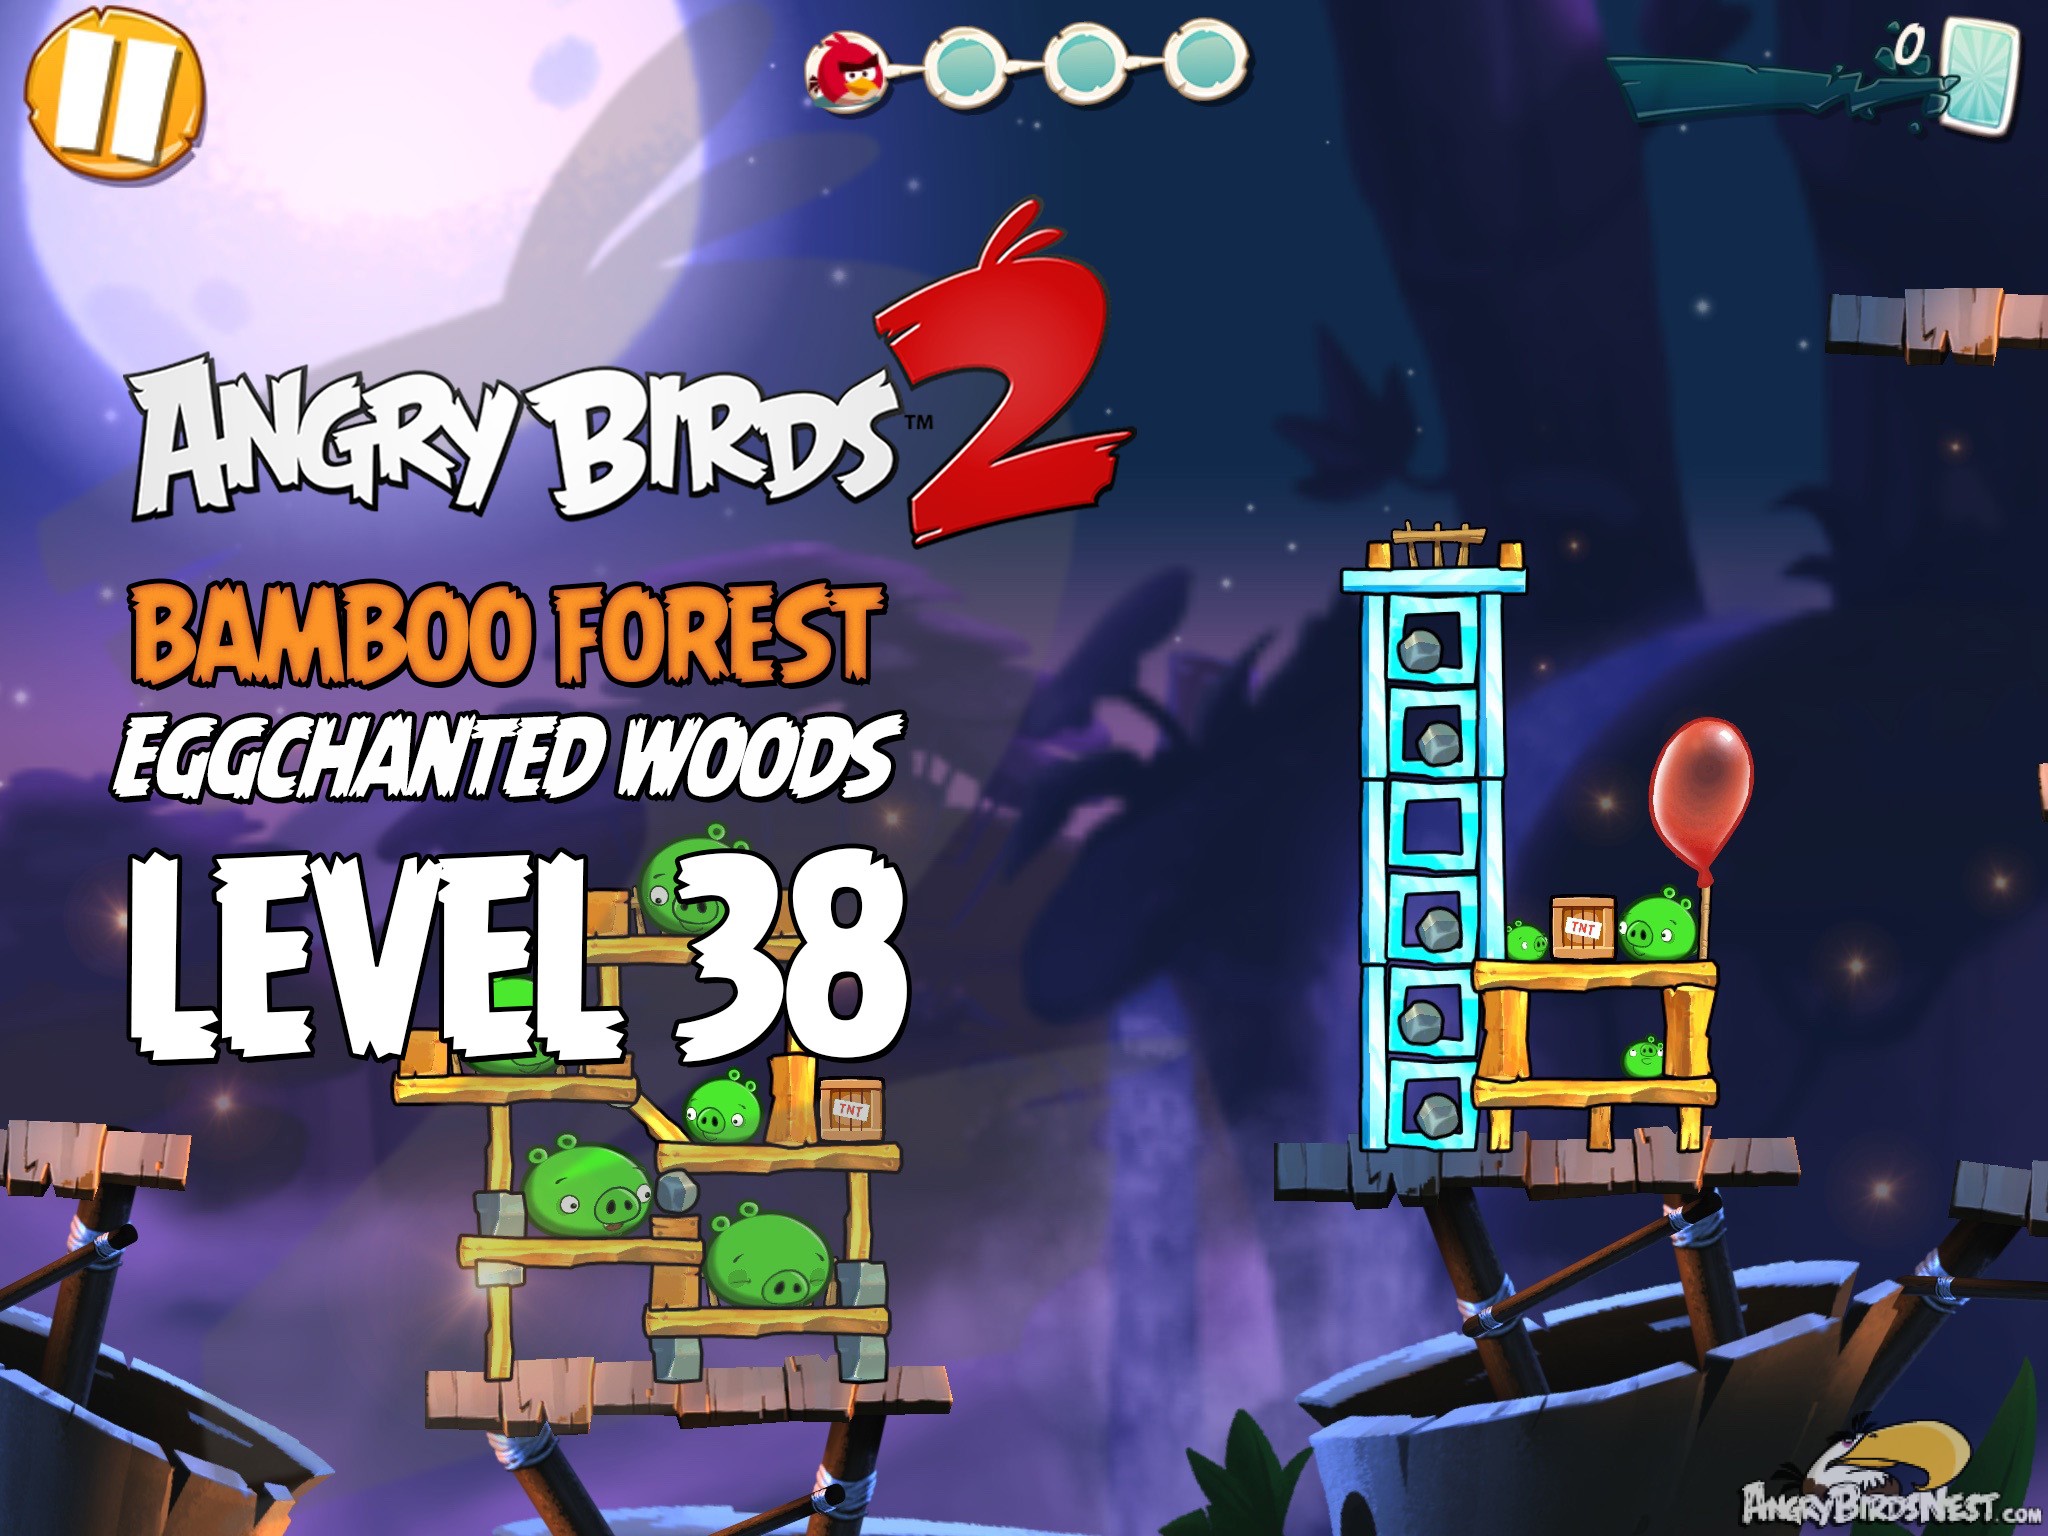 Angry Birds 2 Bamboo Forest Eggchanted Woods Level 38